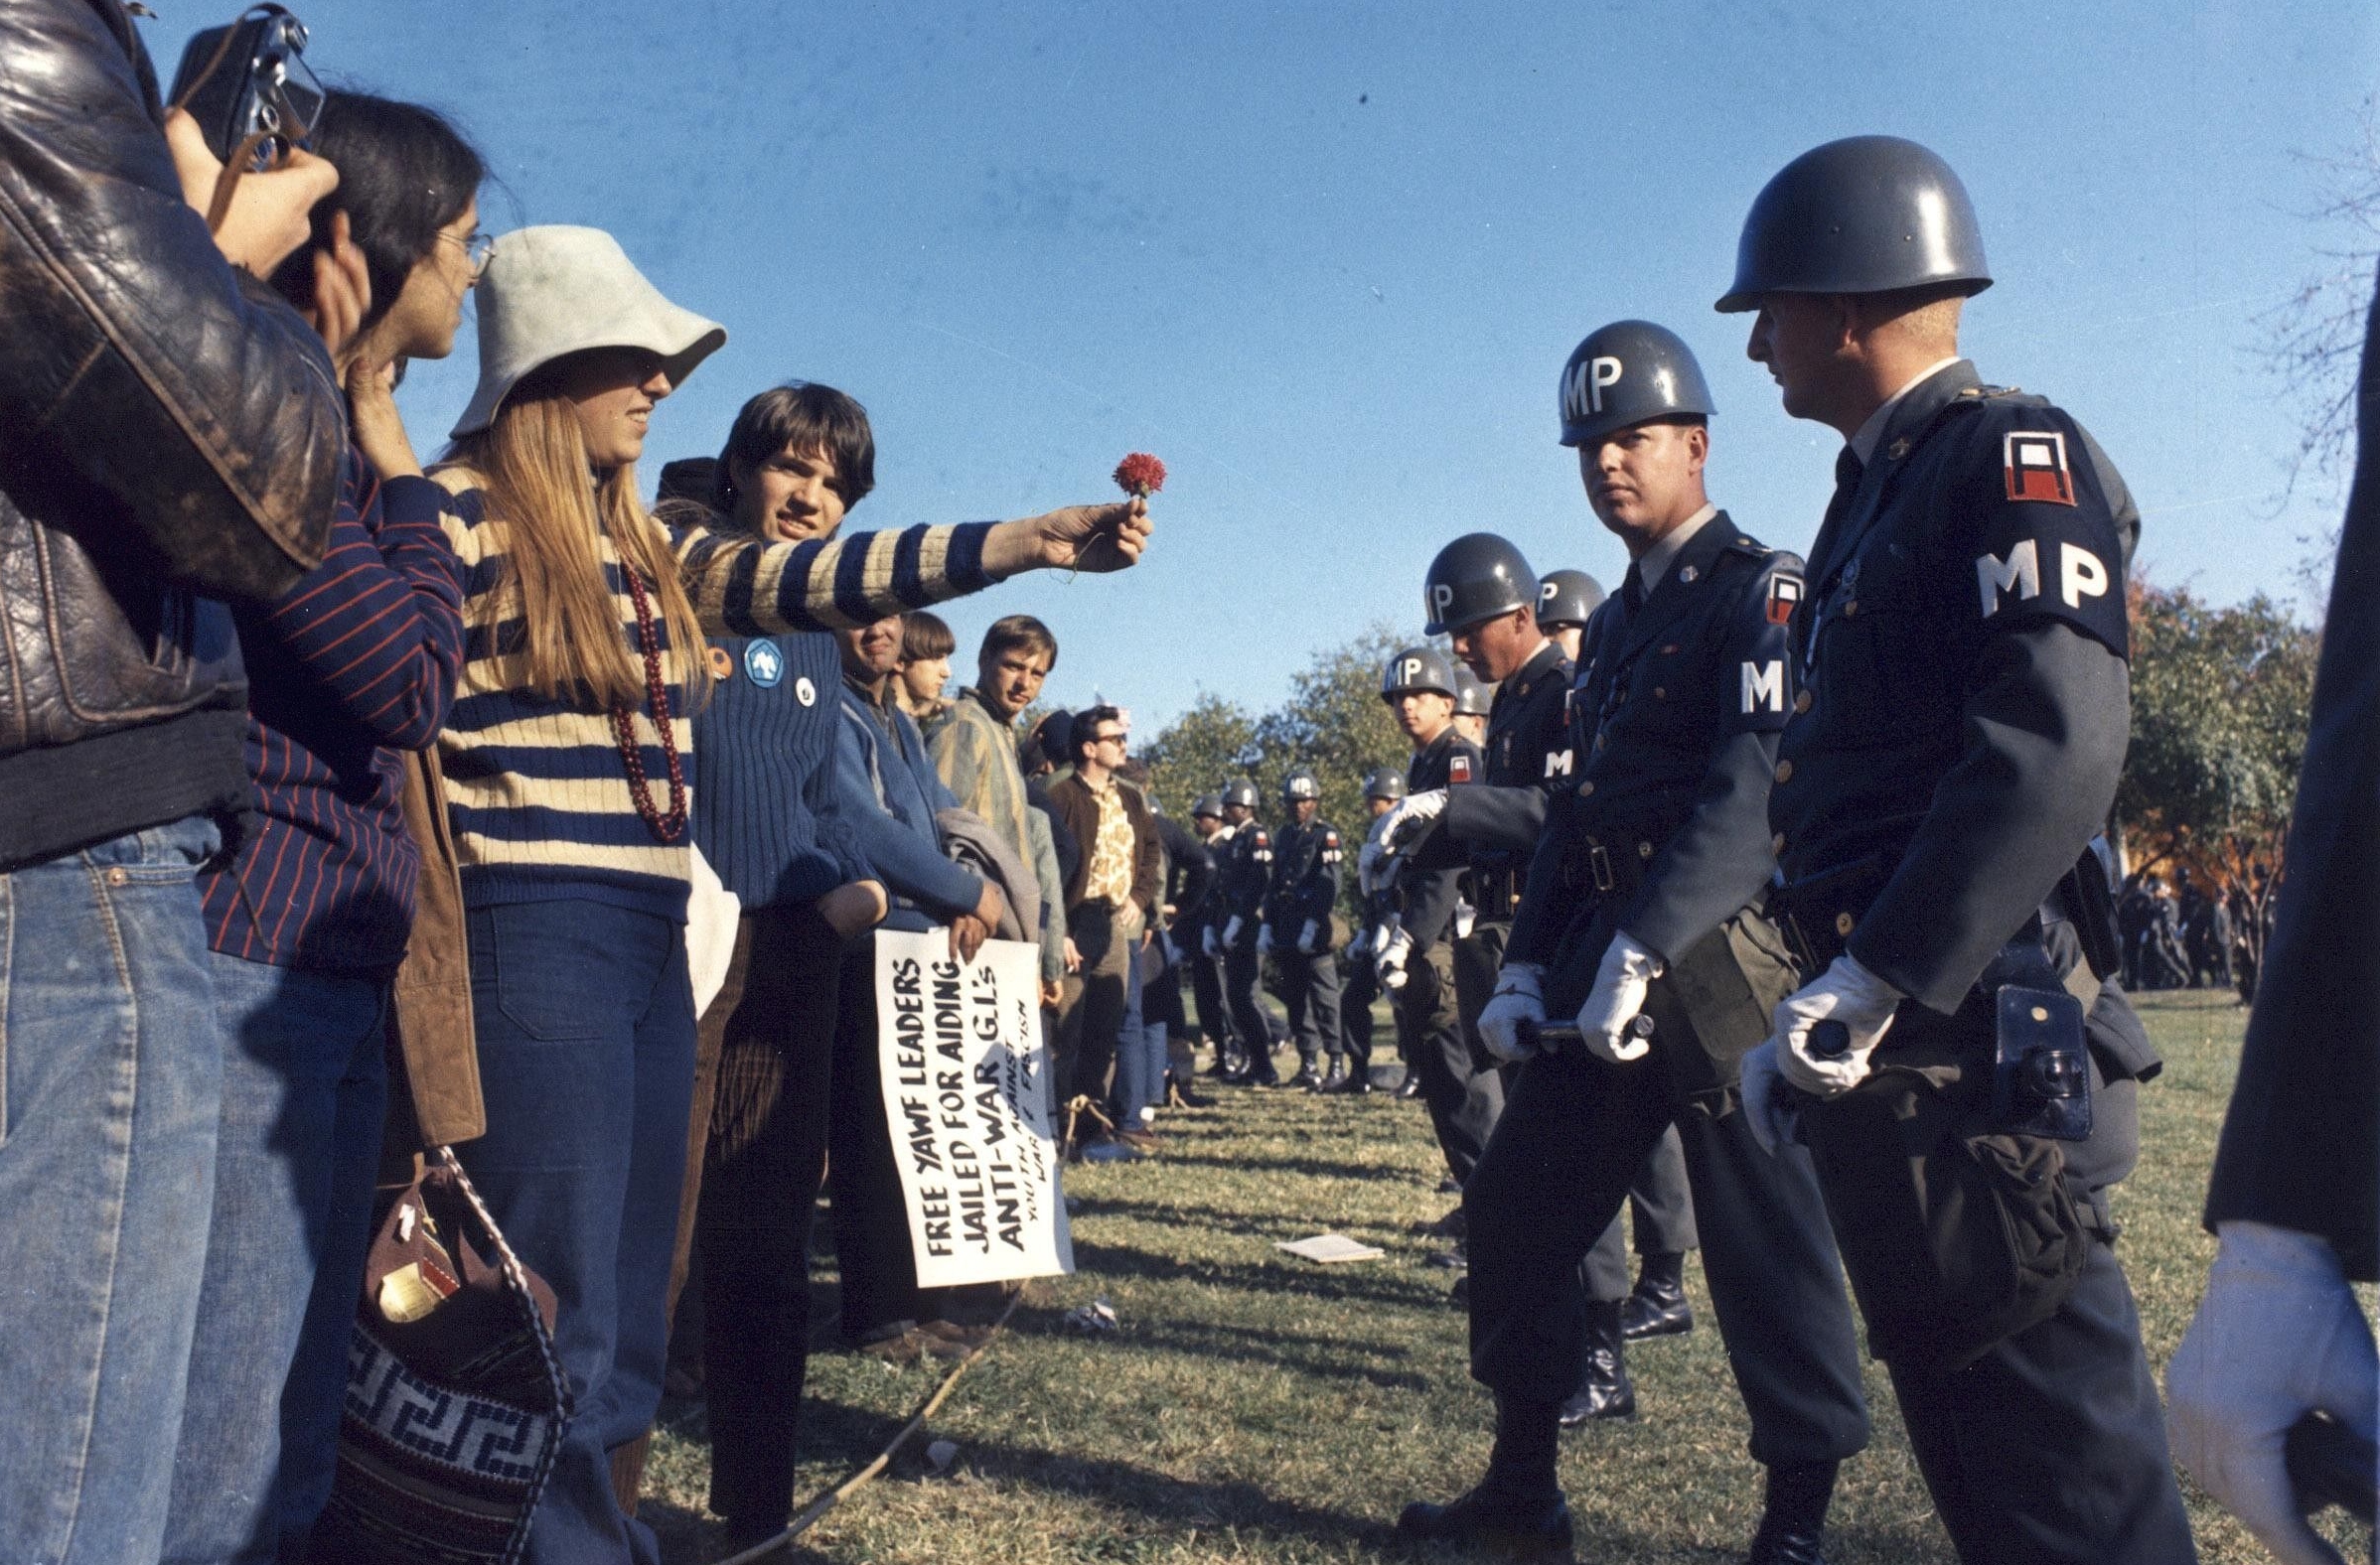 A Demonstrator Offers a Flower to a Military Police Officer